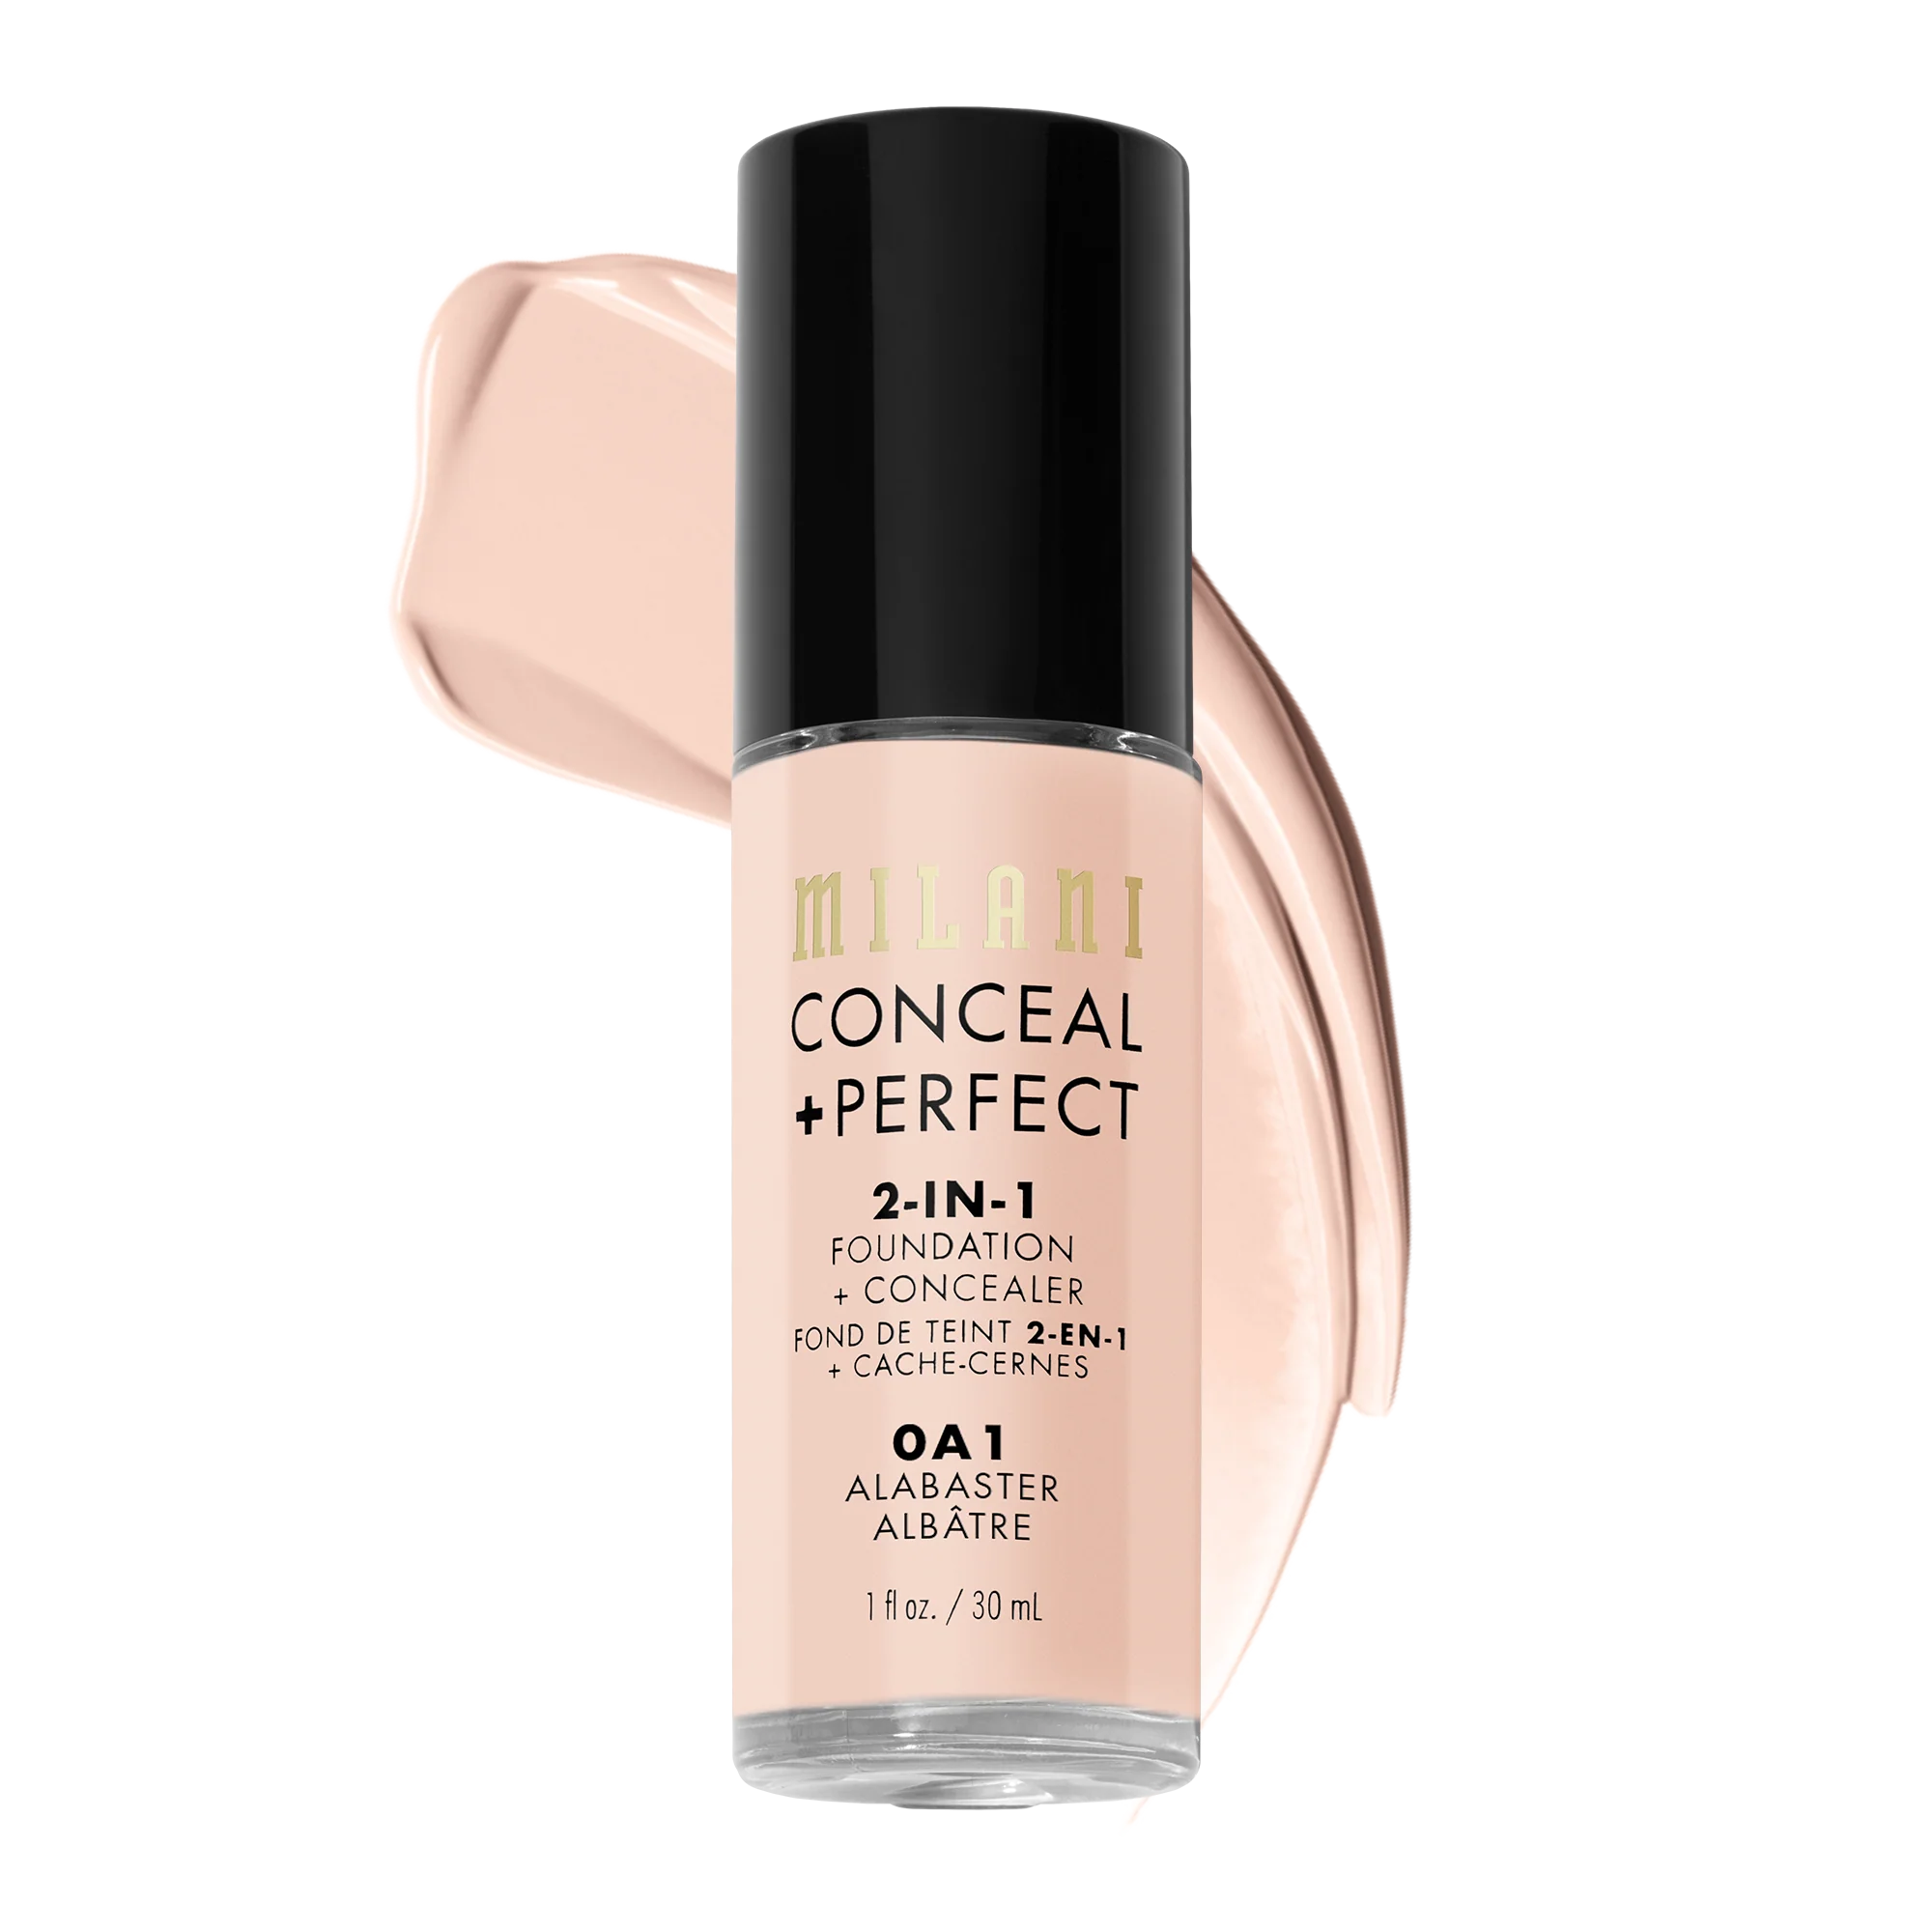 MILANI Conceal + Perfect 2-in-1 Foundation + Concealer - Alabaster #0A1